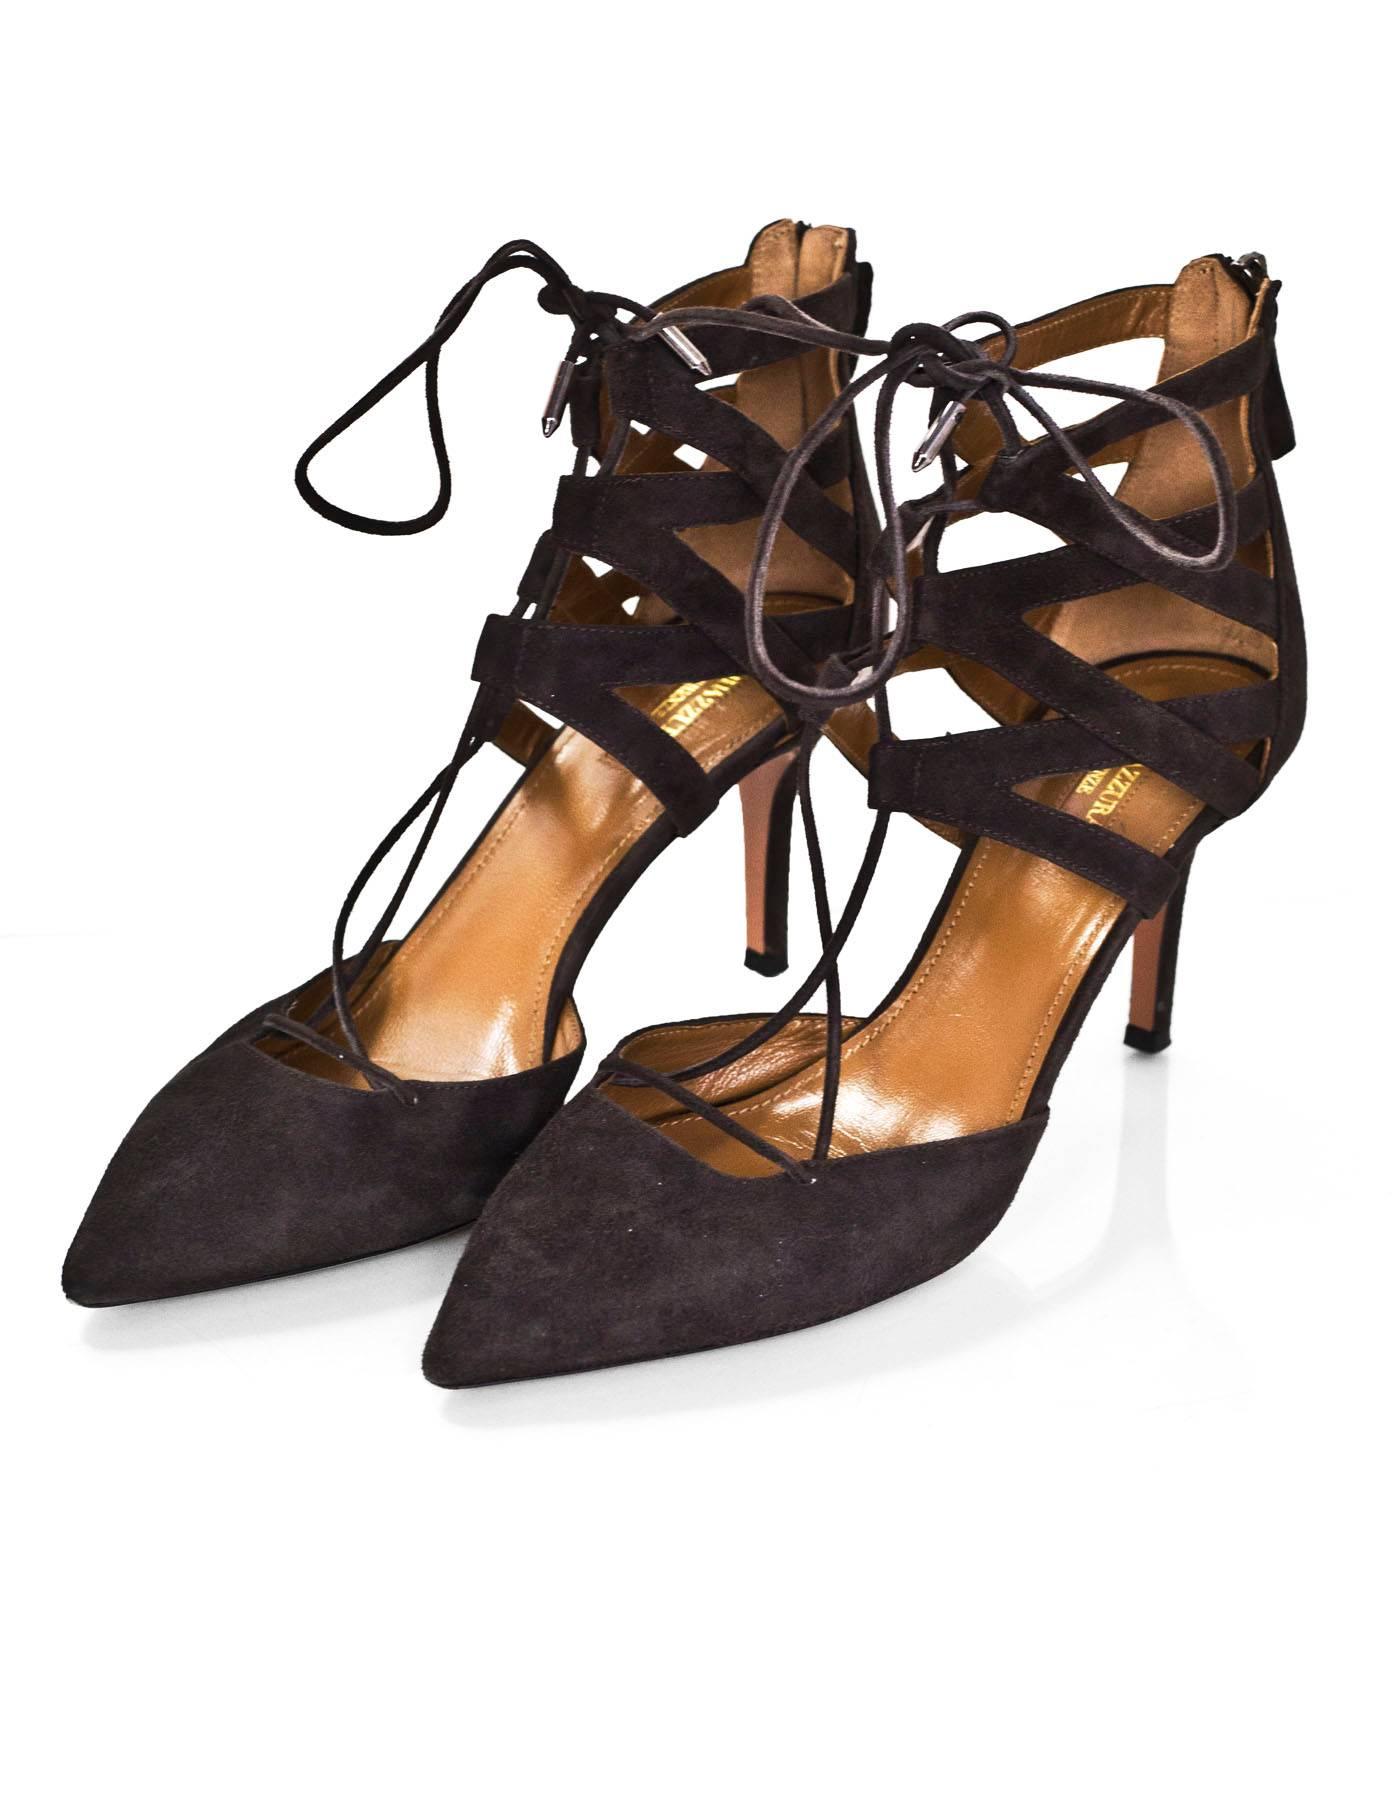 Aquazzura Brown Suede Belgravia 75 Pumps Sz 40

Made In: Italy
Color: Brown
Materials: Suede
Closure/Opening: Lace tie closure and zip closure at back of heel
Sole Stamp: Aquazzura Firenze Vero Cuoio Made In Italy 40
Retail Price: $725 + tax
Overall